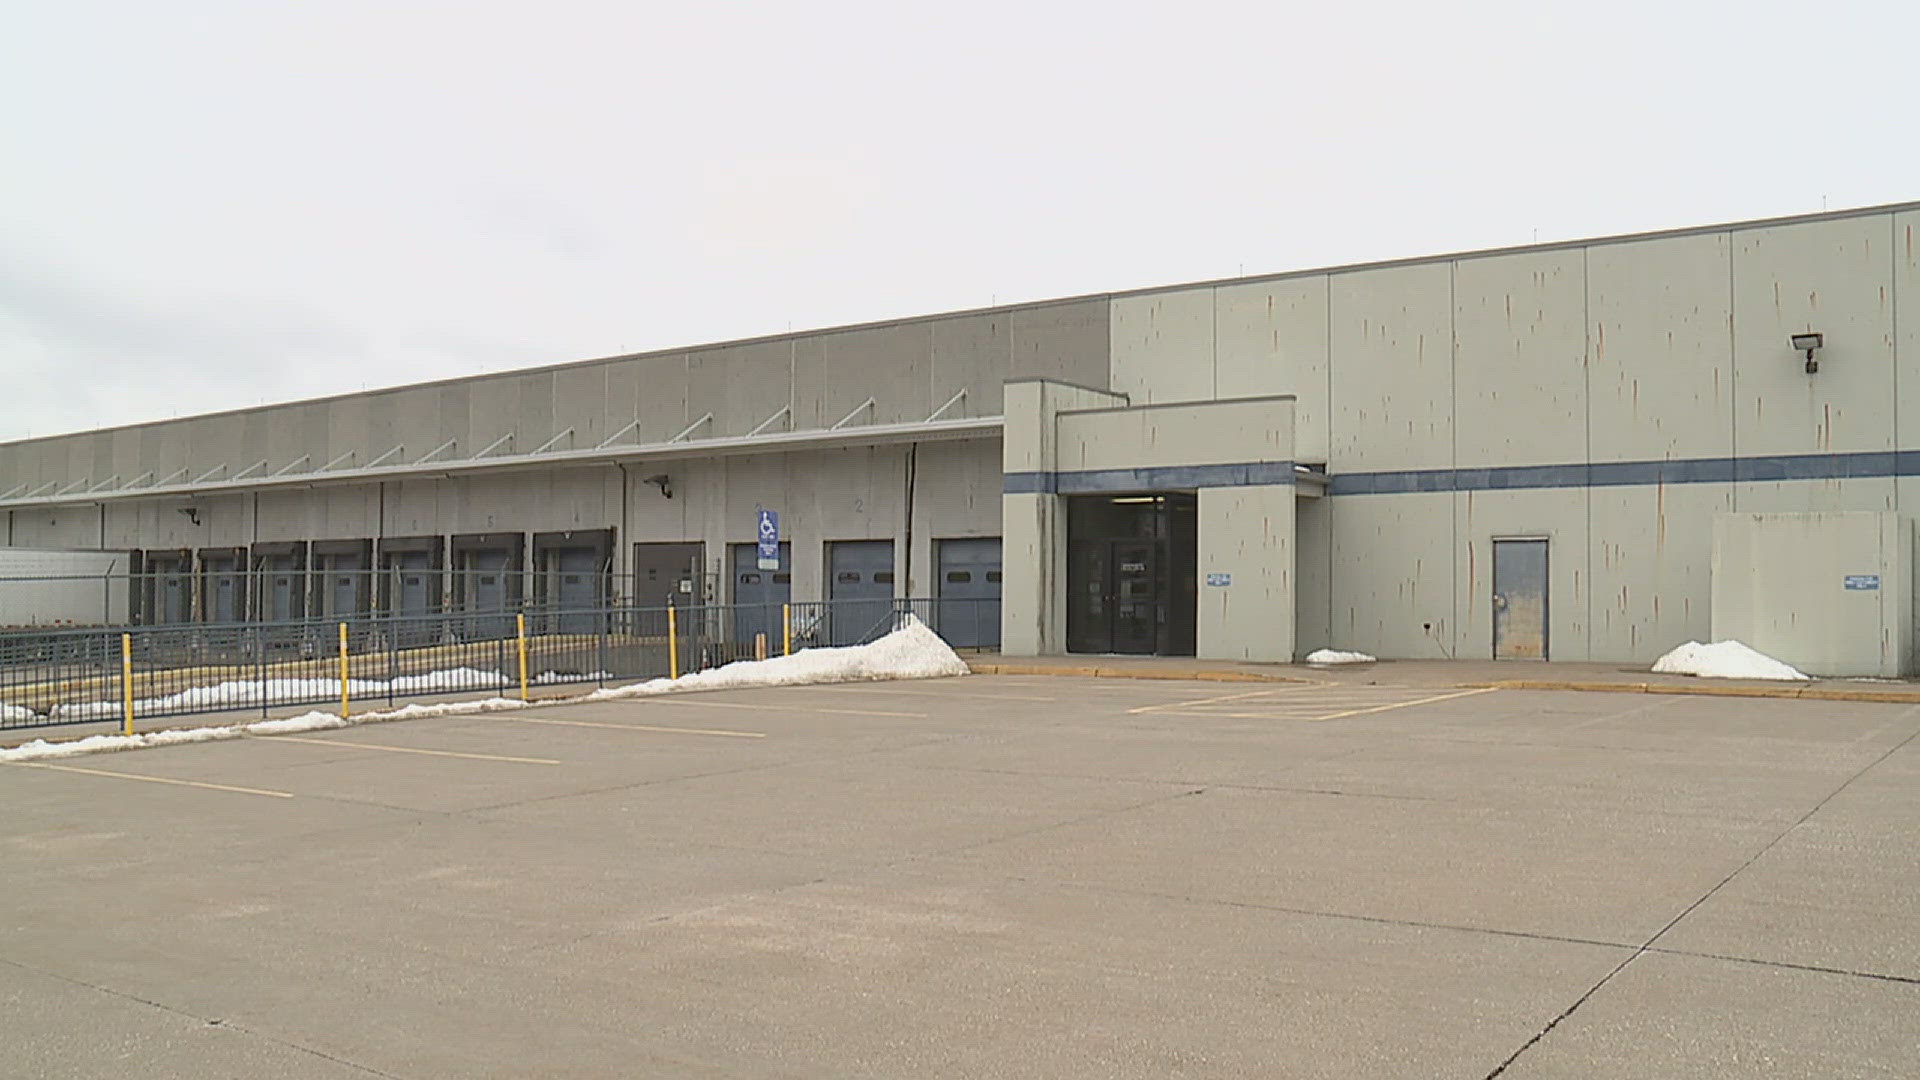 The move has faced backlash due to concerns over how it would impact jobs in the area.